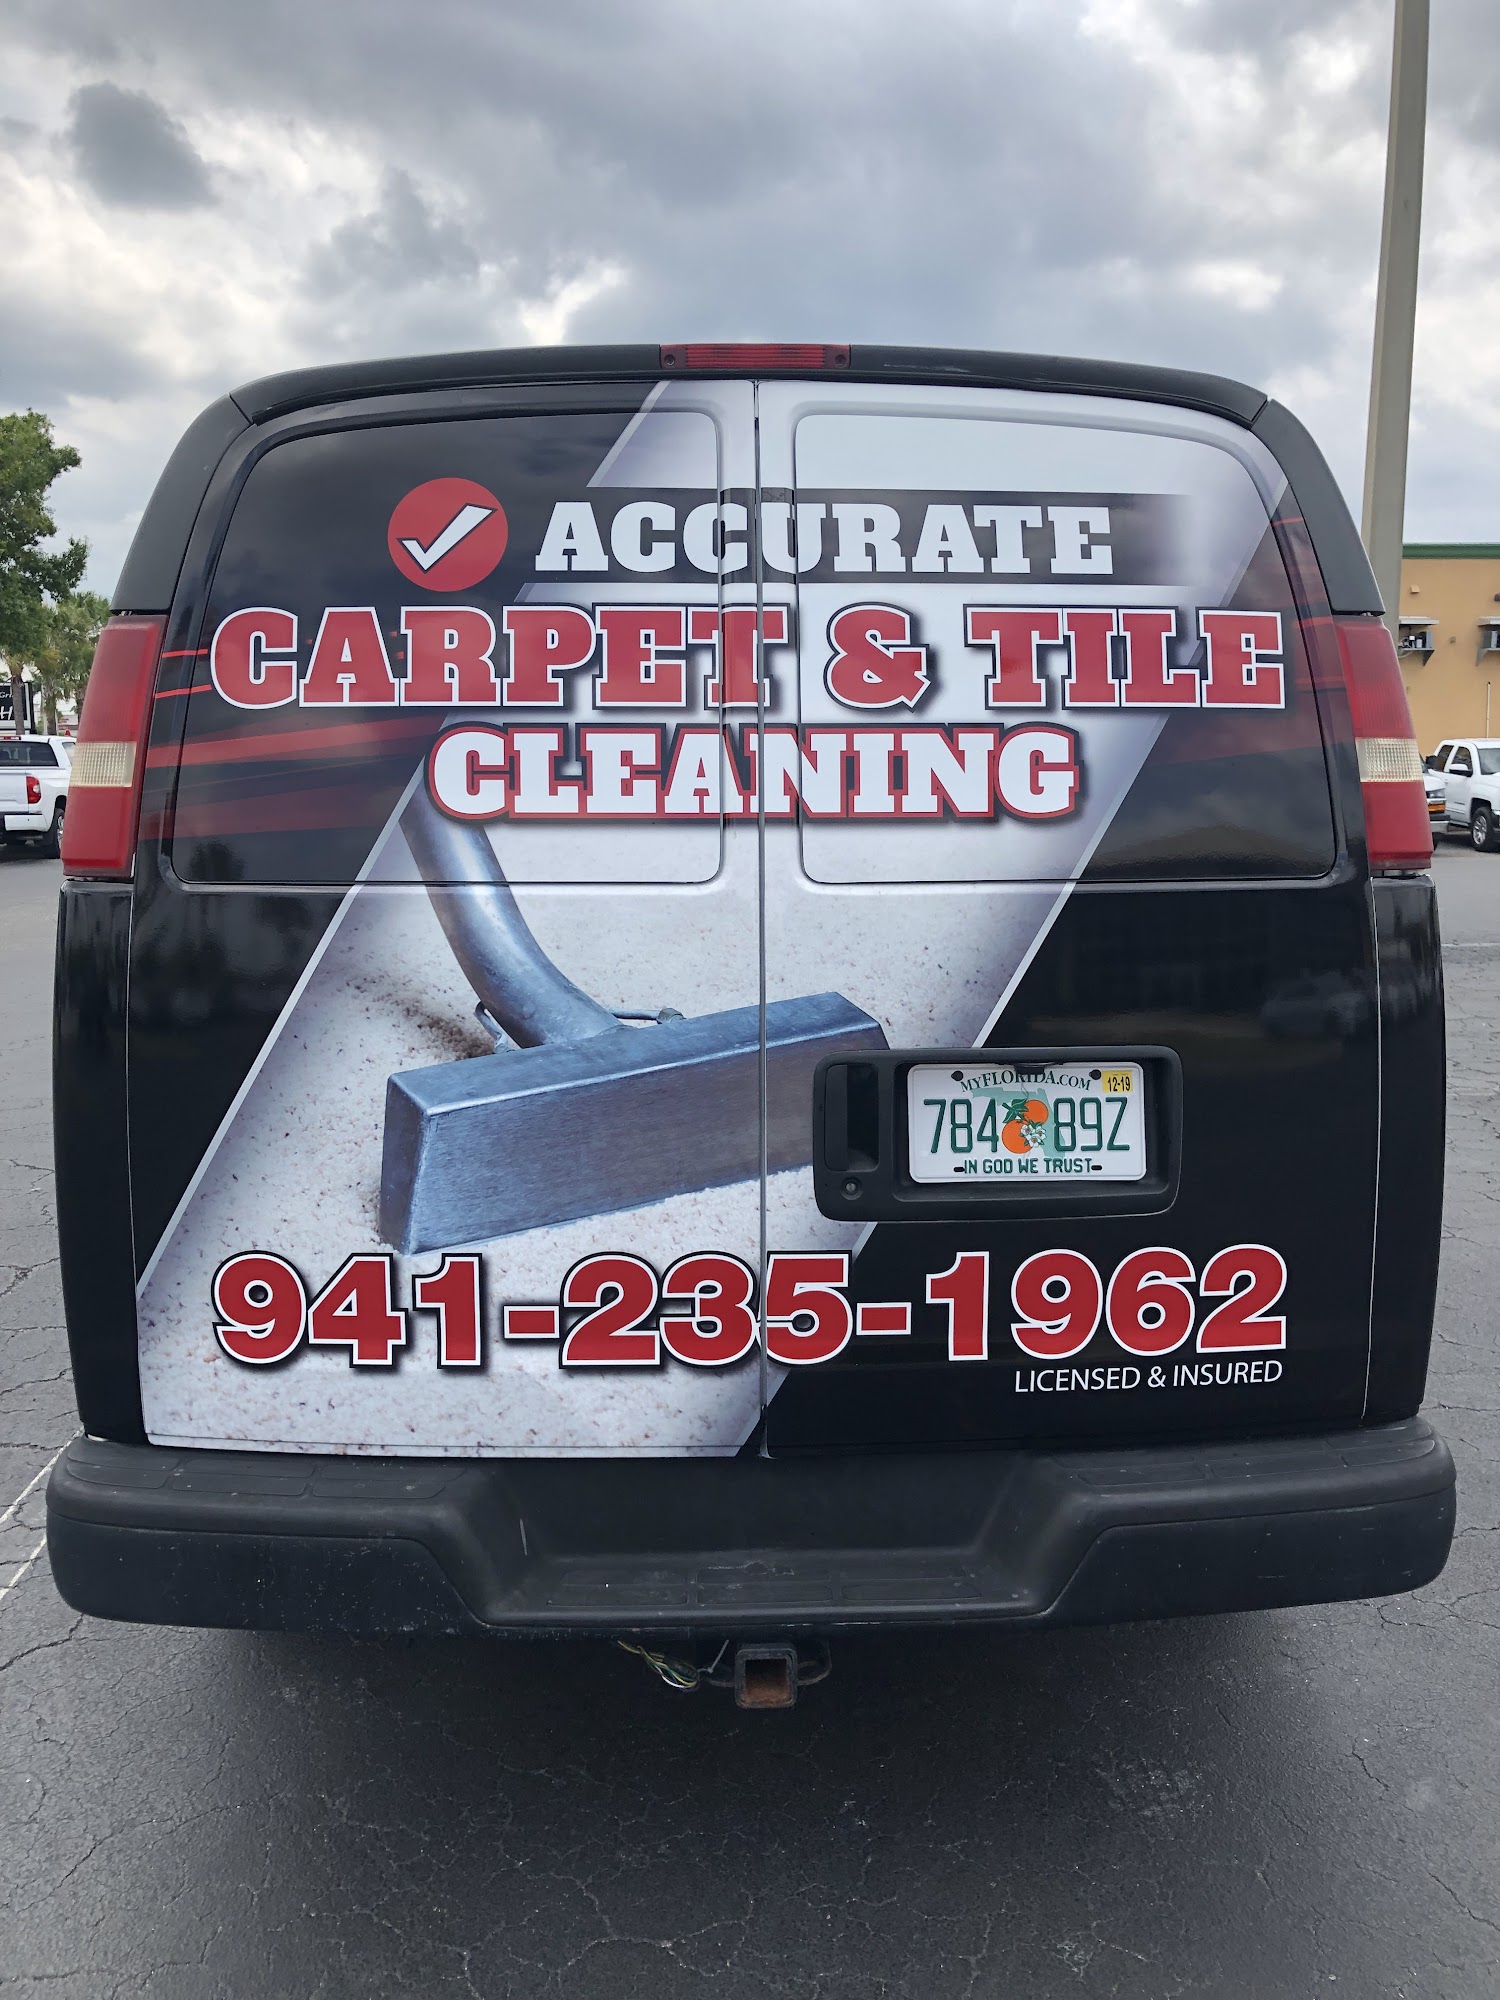 Accurate Carpet & Tile Cleaning